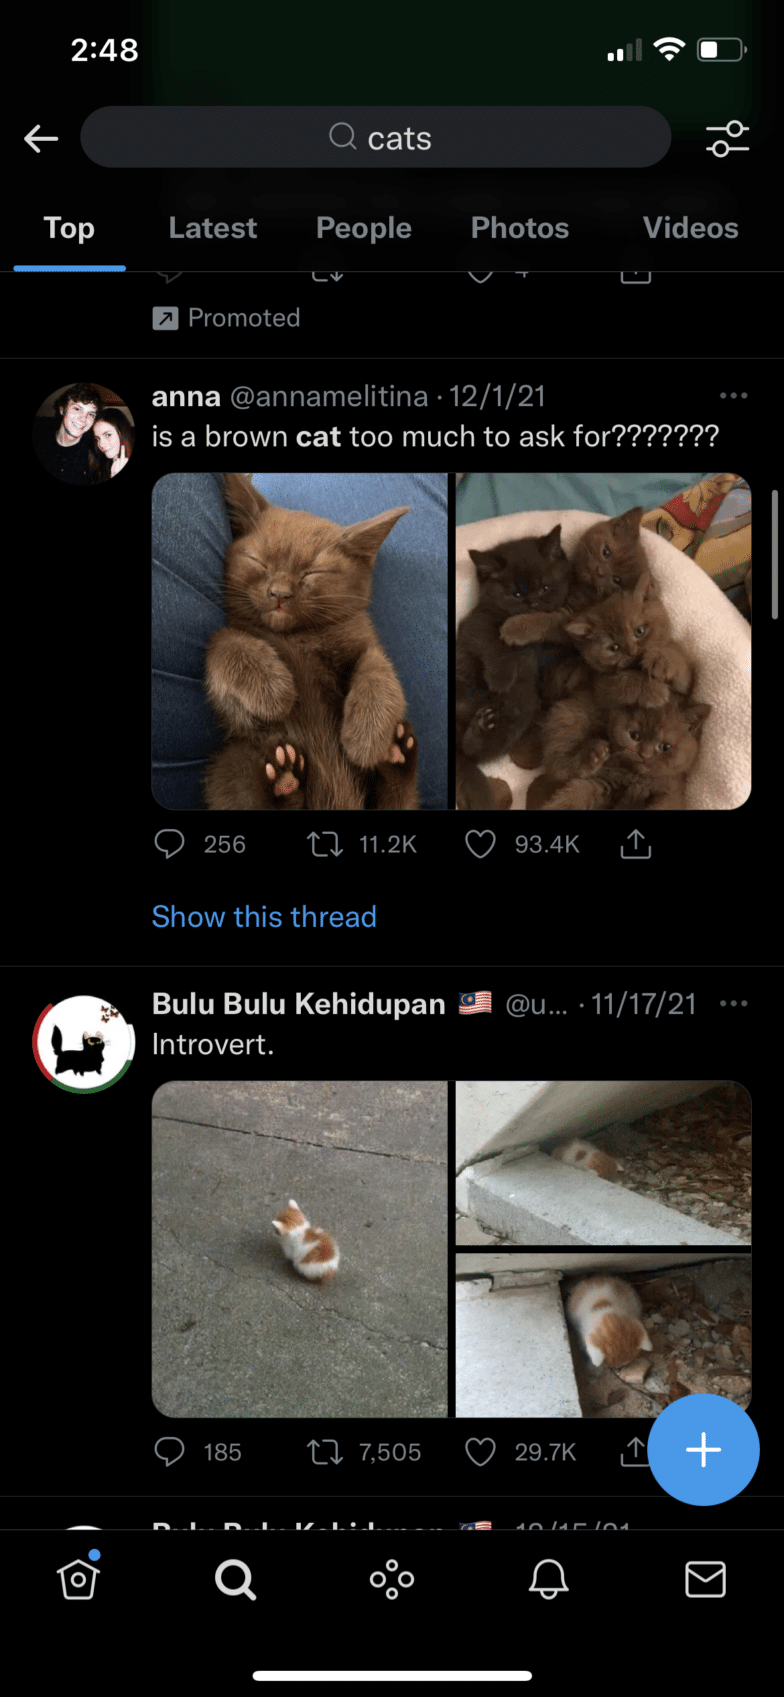 mobile search for "cats" on Twitter with dark mode enabled